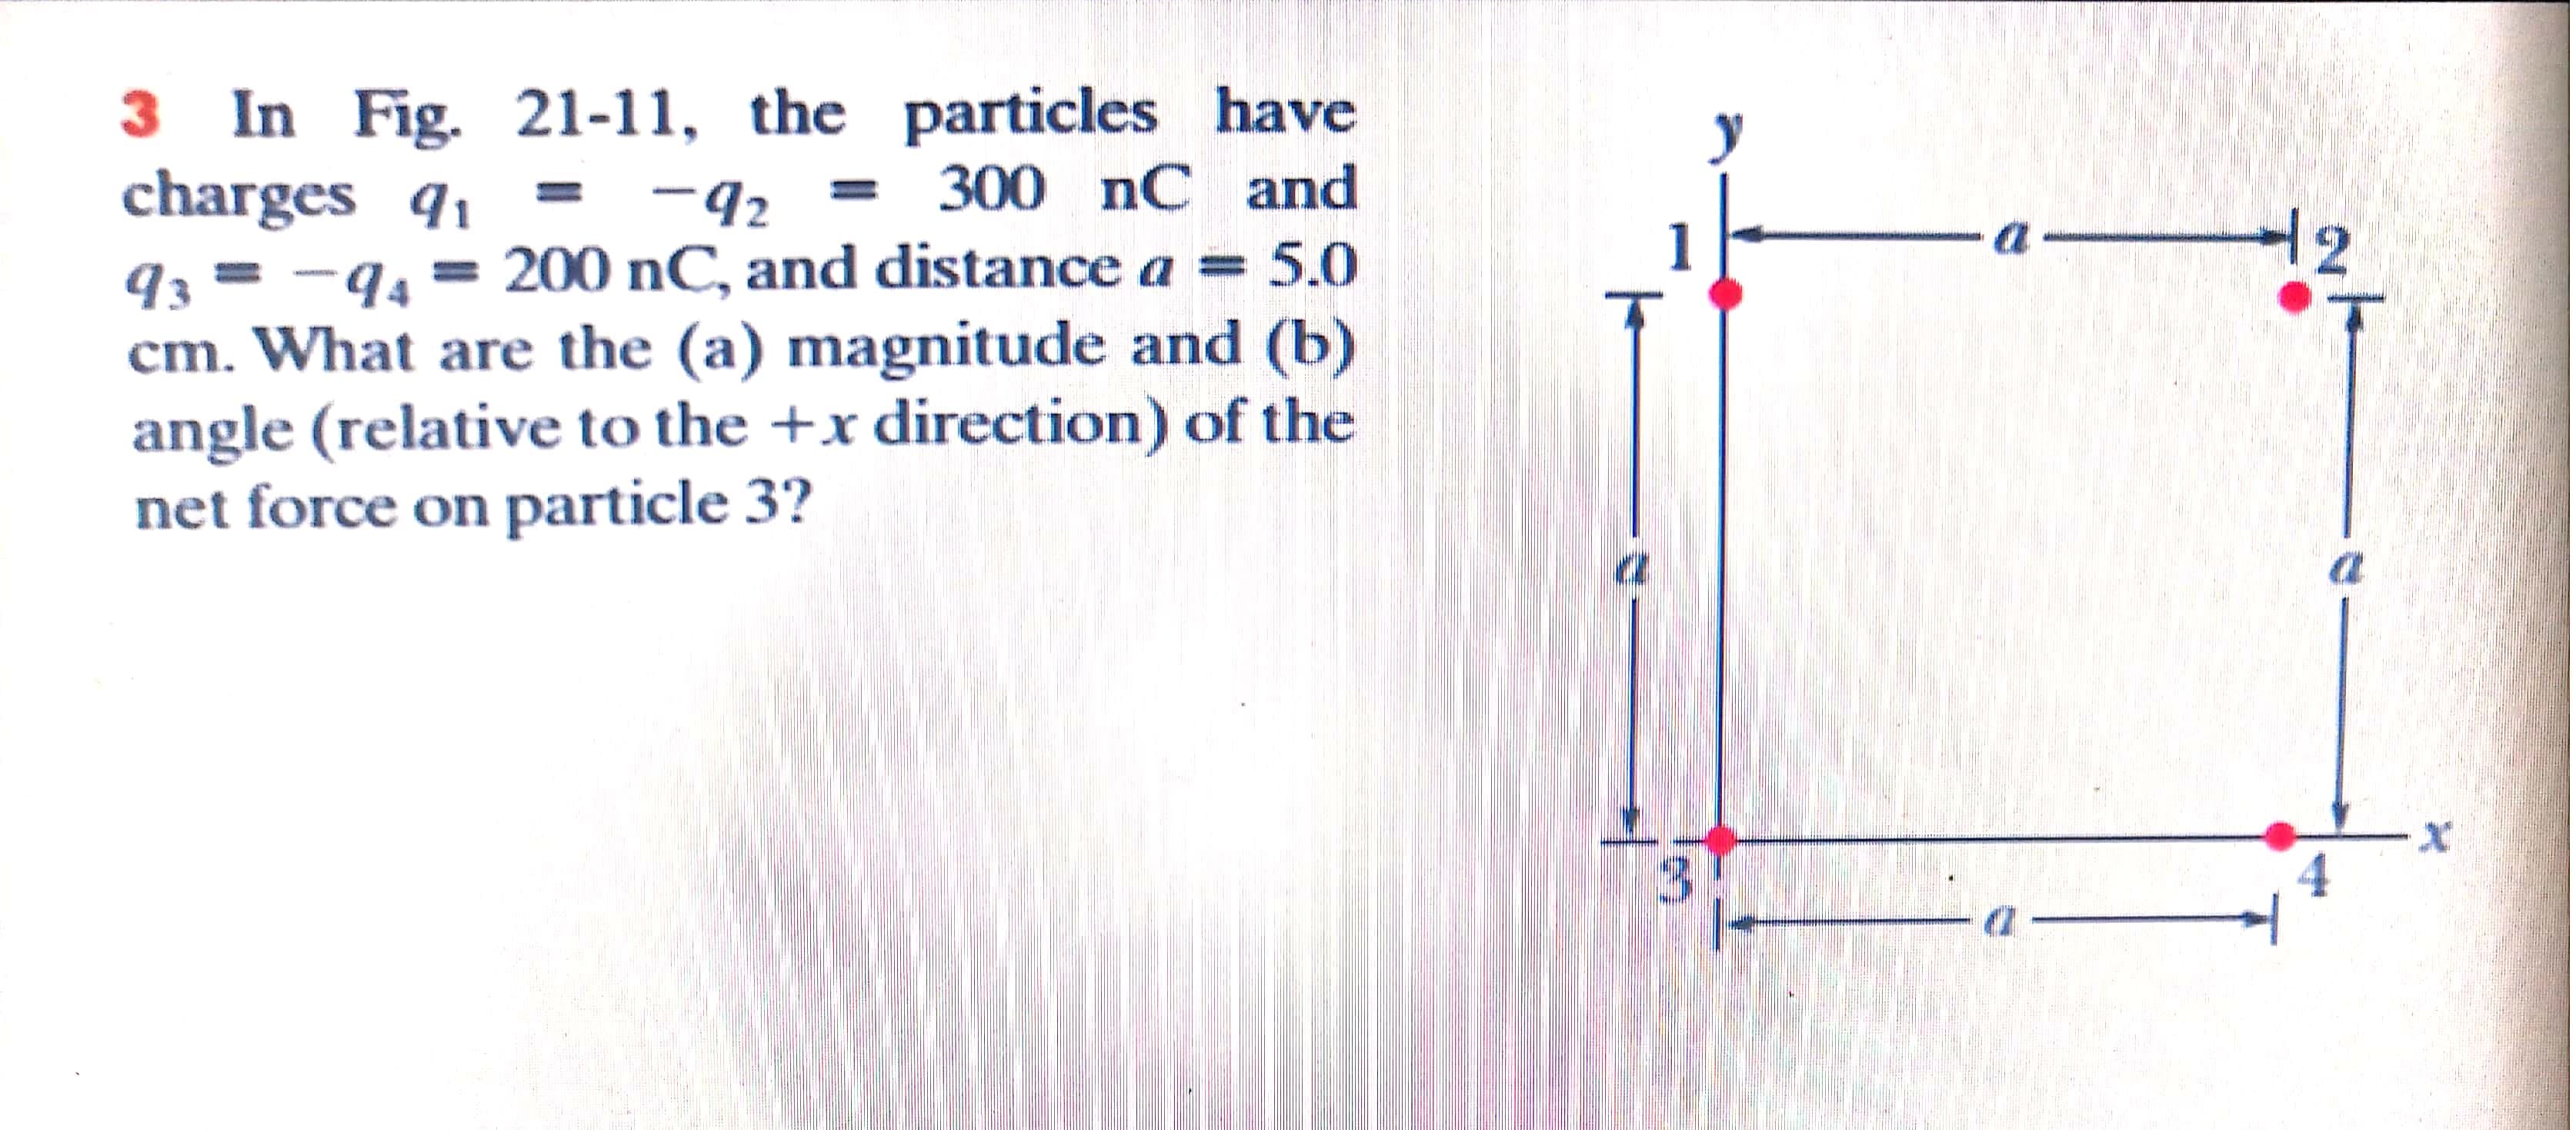 3 In Fig. 21-11, the particles have
charges q, = -92 = 300 nC and
q3 = -94 = 200 nC, and distance a = 5.0
cm. What are the (a) magnitude and (b)
angle (relative to the +x direction) of the
net force on particle 3?
-42
12
3.
